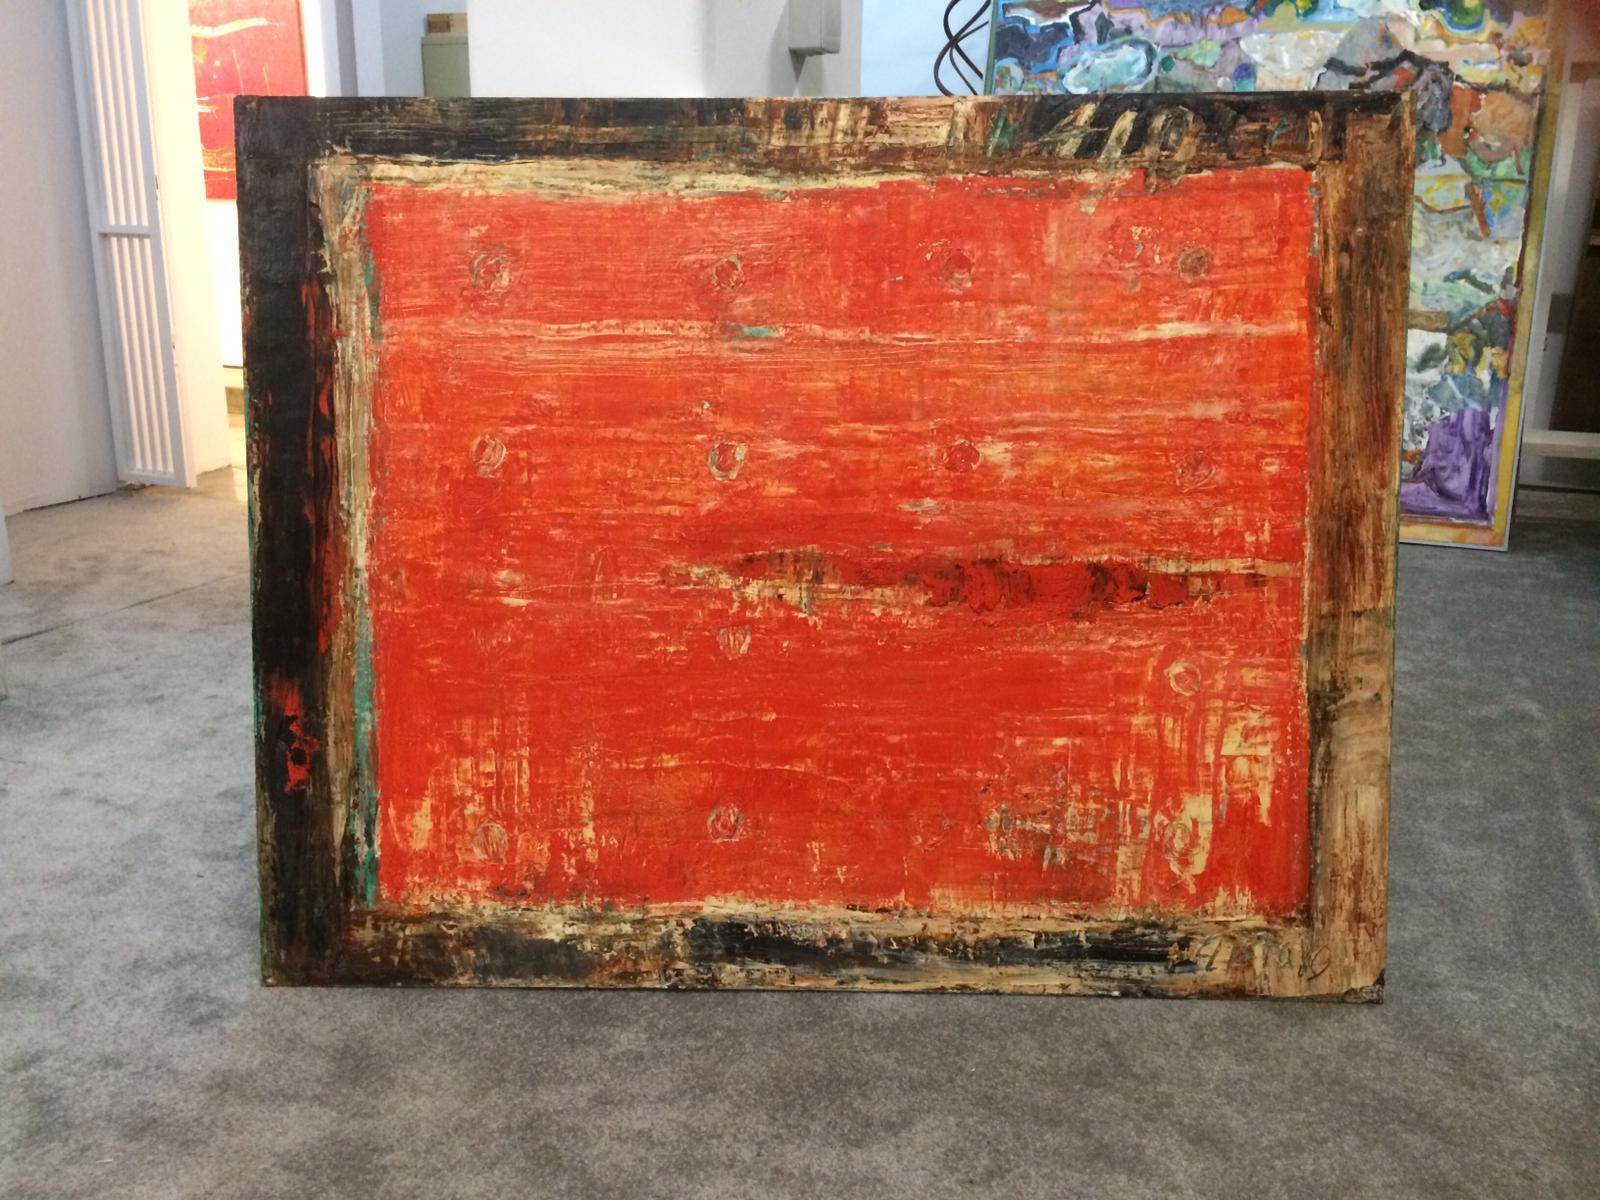 Untitled, Gonzalez Bravo, Abstract Art, 2015, Oil on canvas, Orange, Red For Sale 3